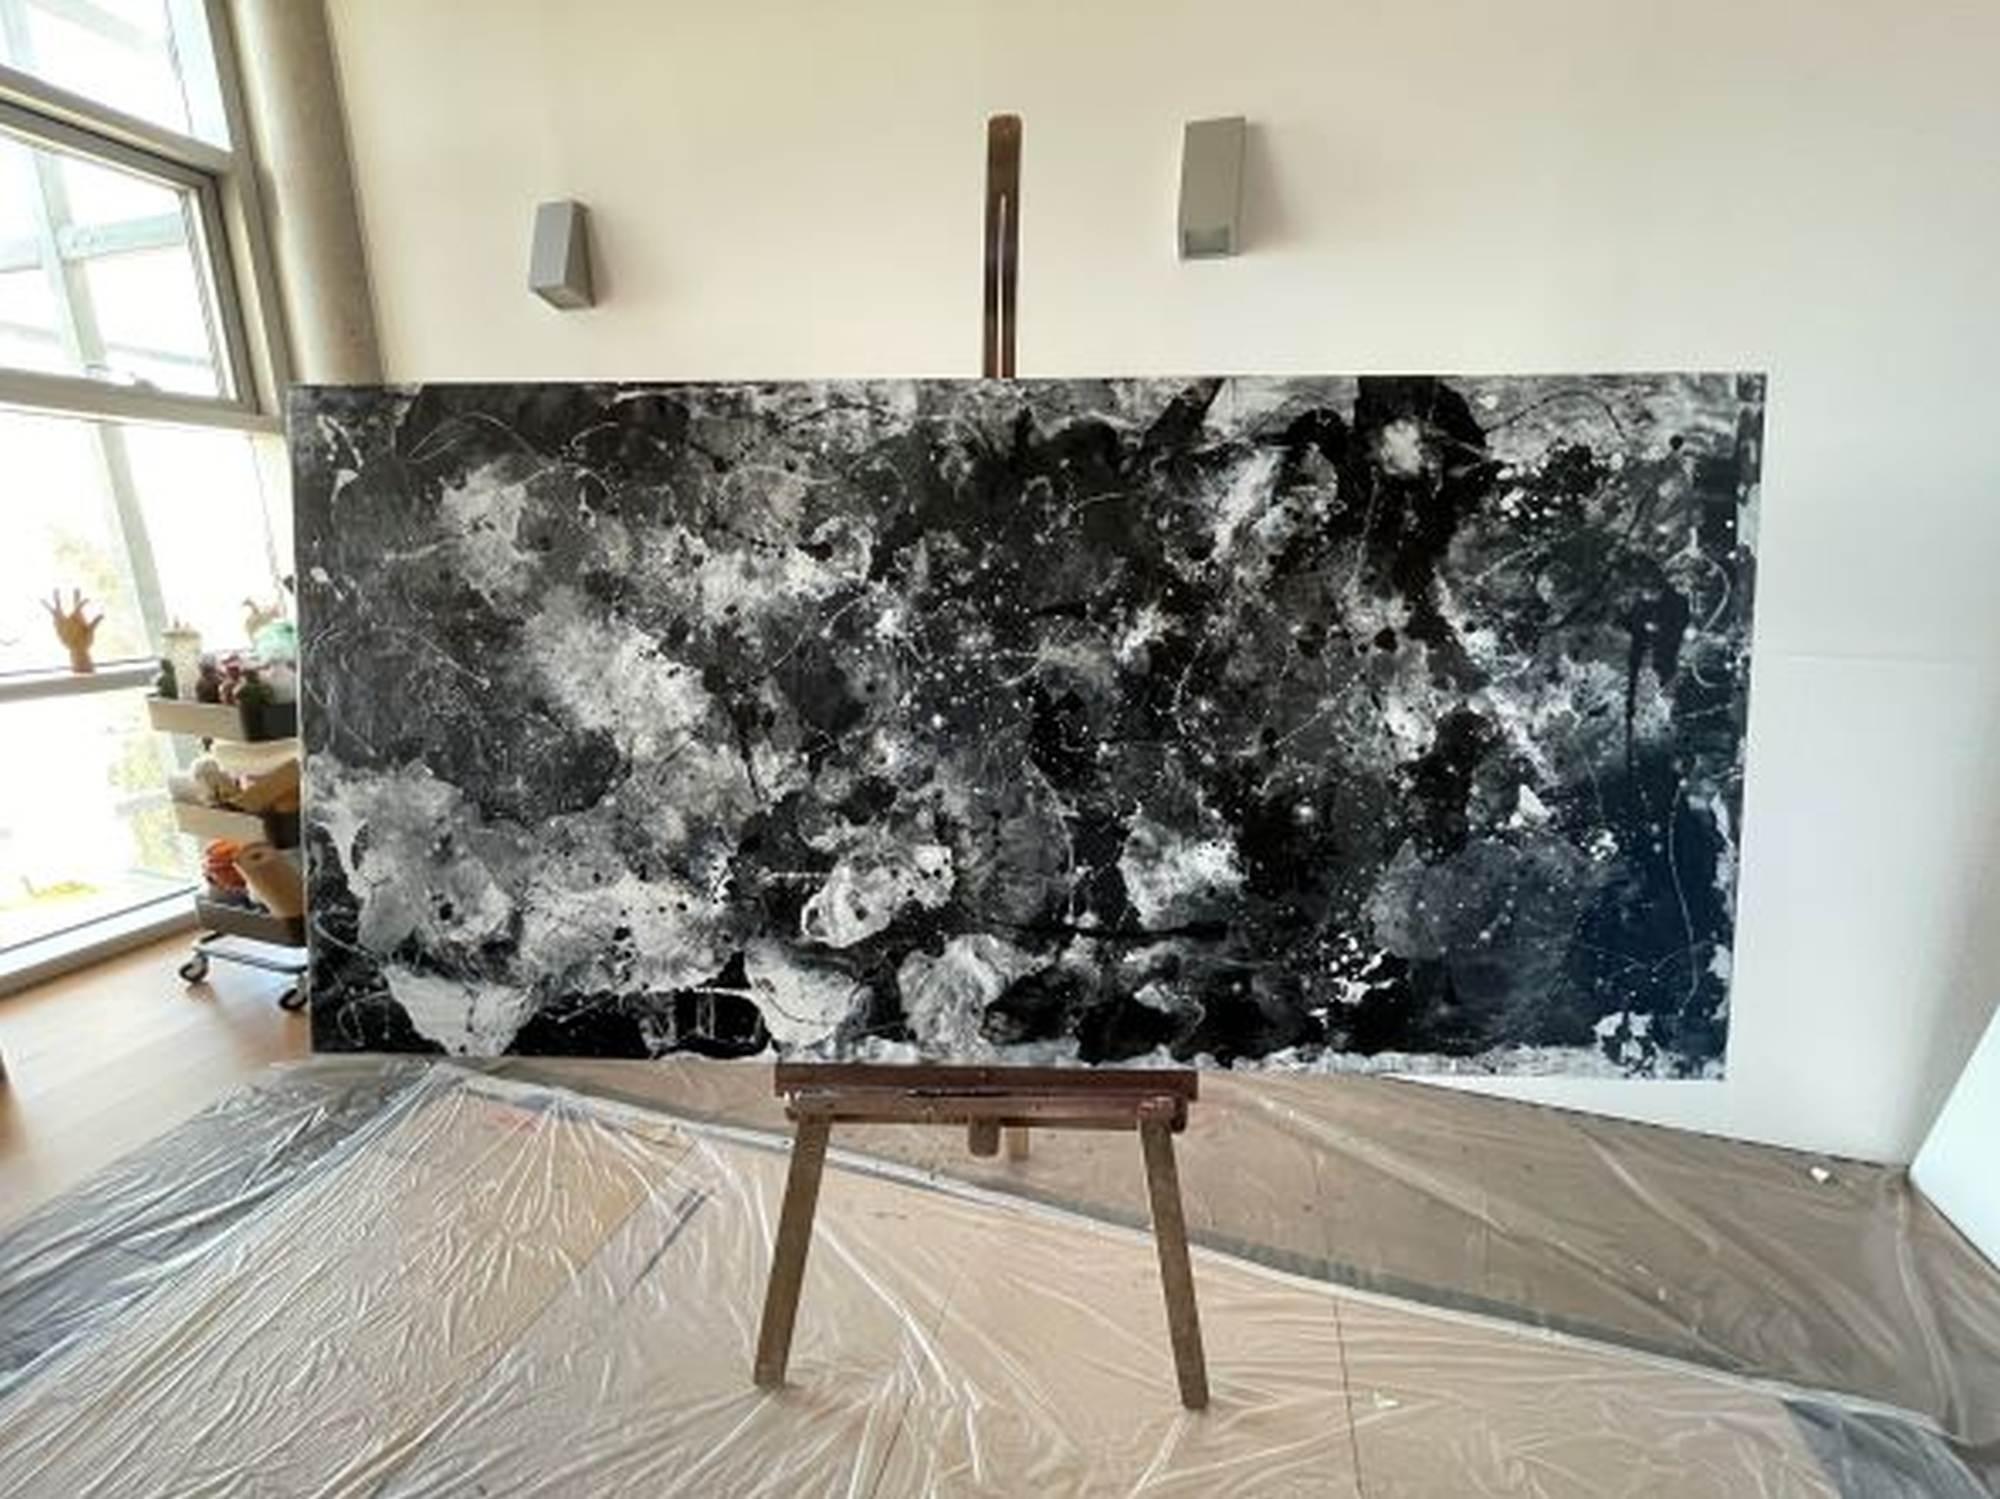 Due to the size of the work, it was sent rolled in a tube

The abstract painting that appears before your eyes is a fascinating exploration of black, gray, and white tones that intertwine and merge in a dance of contrasts and subtleties. At first